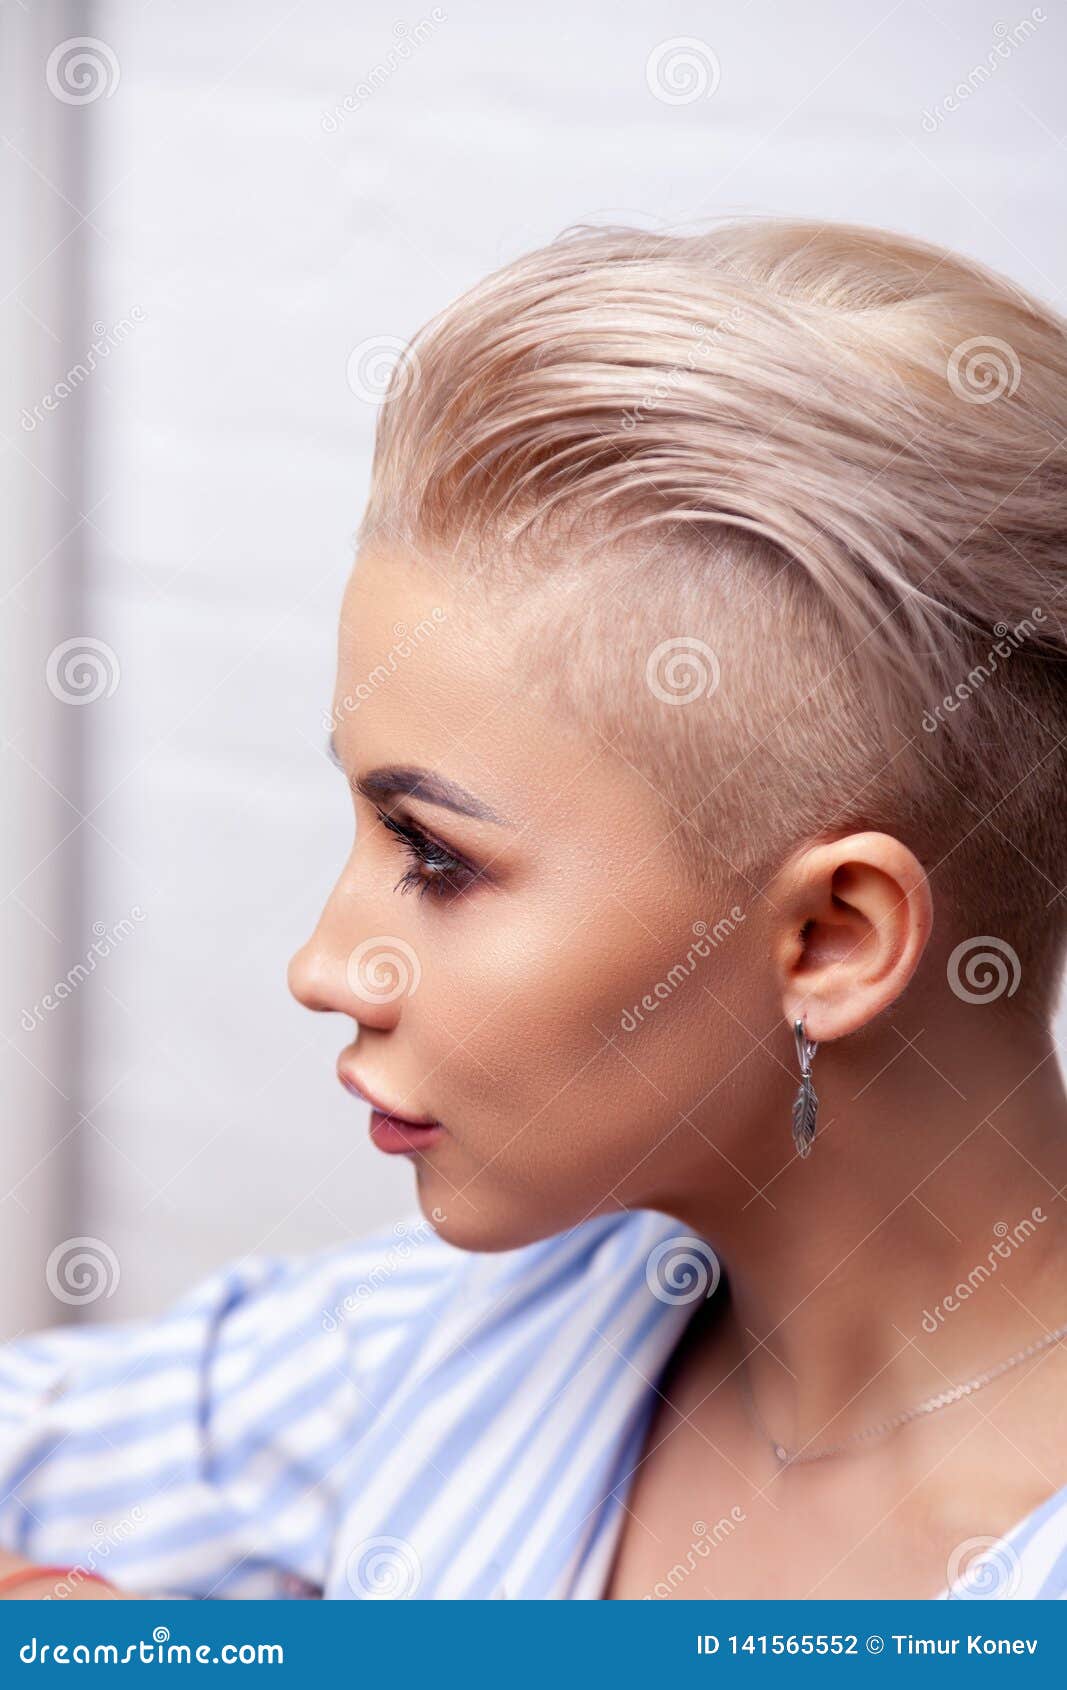 Beauty Girl Portrait With Makeup And White Short Hair Showing Earring  Jewelry Accessories Stock Photo Picture and Royalty Free Image Image  22578784